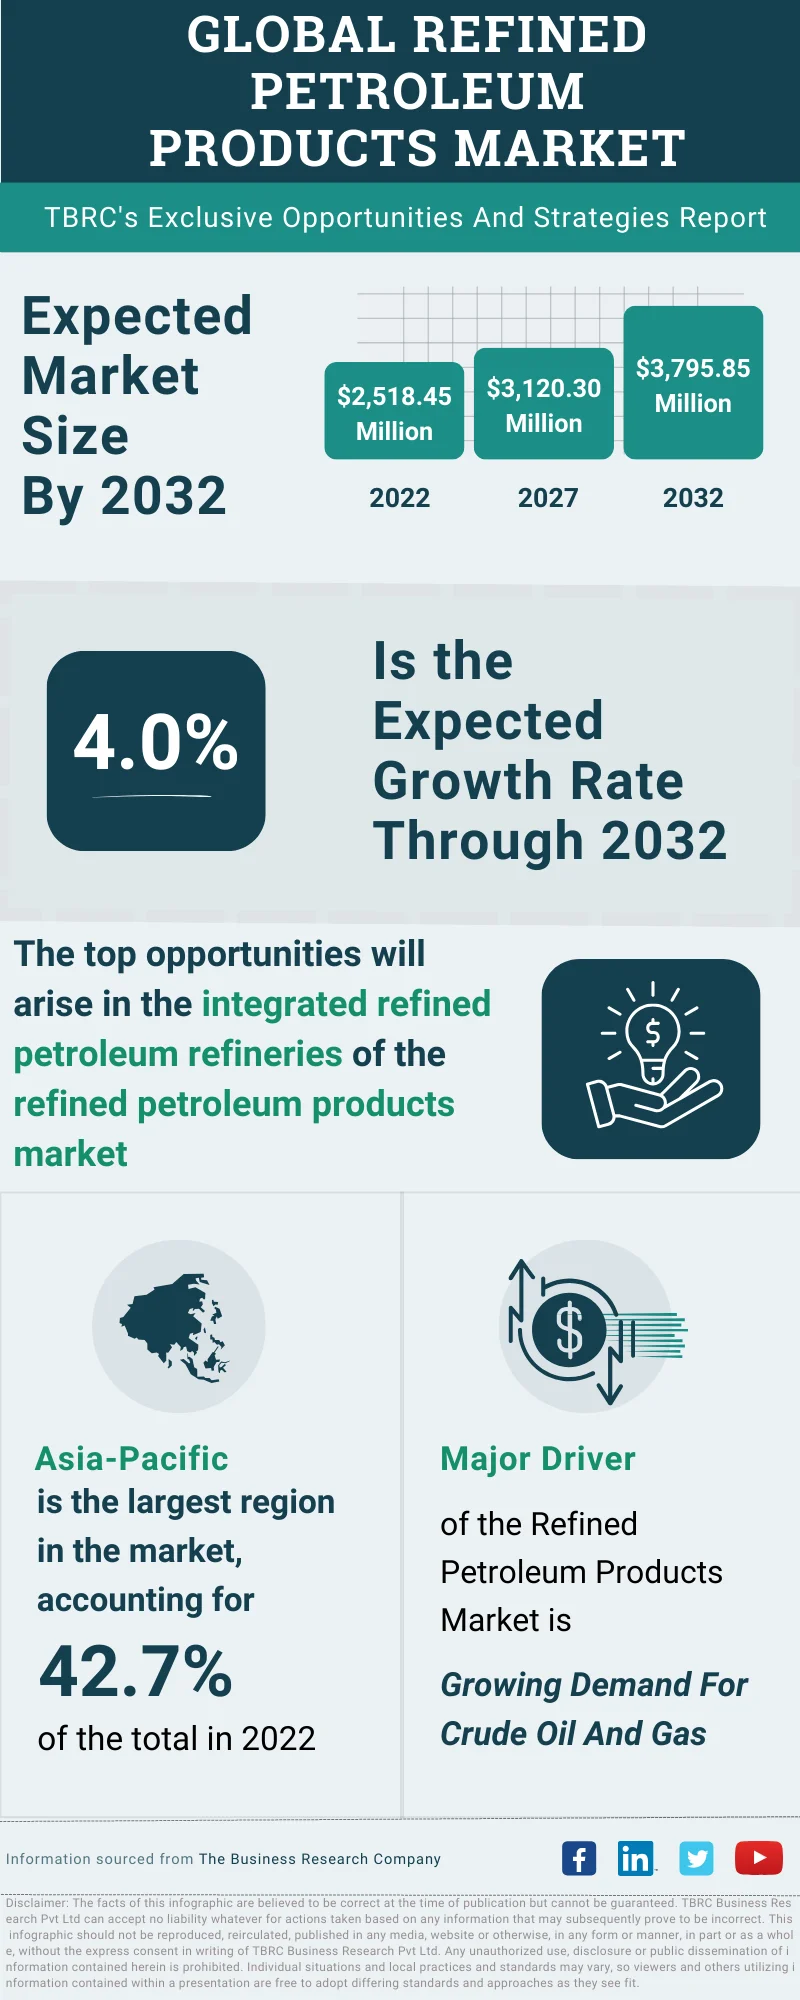 Global Refined Petroleum Products Market Report And Strategies To 2032